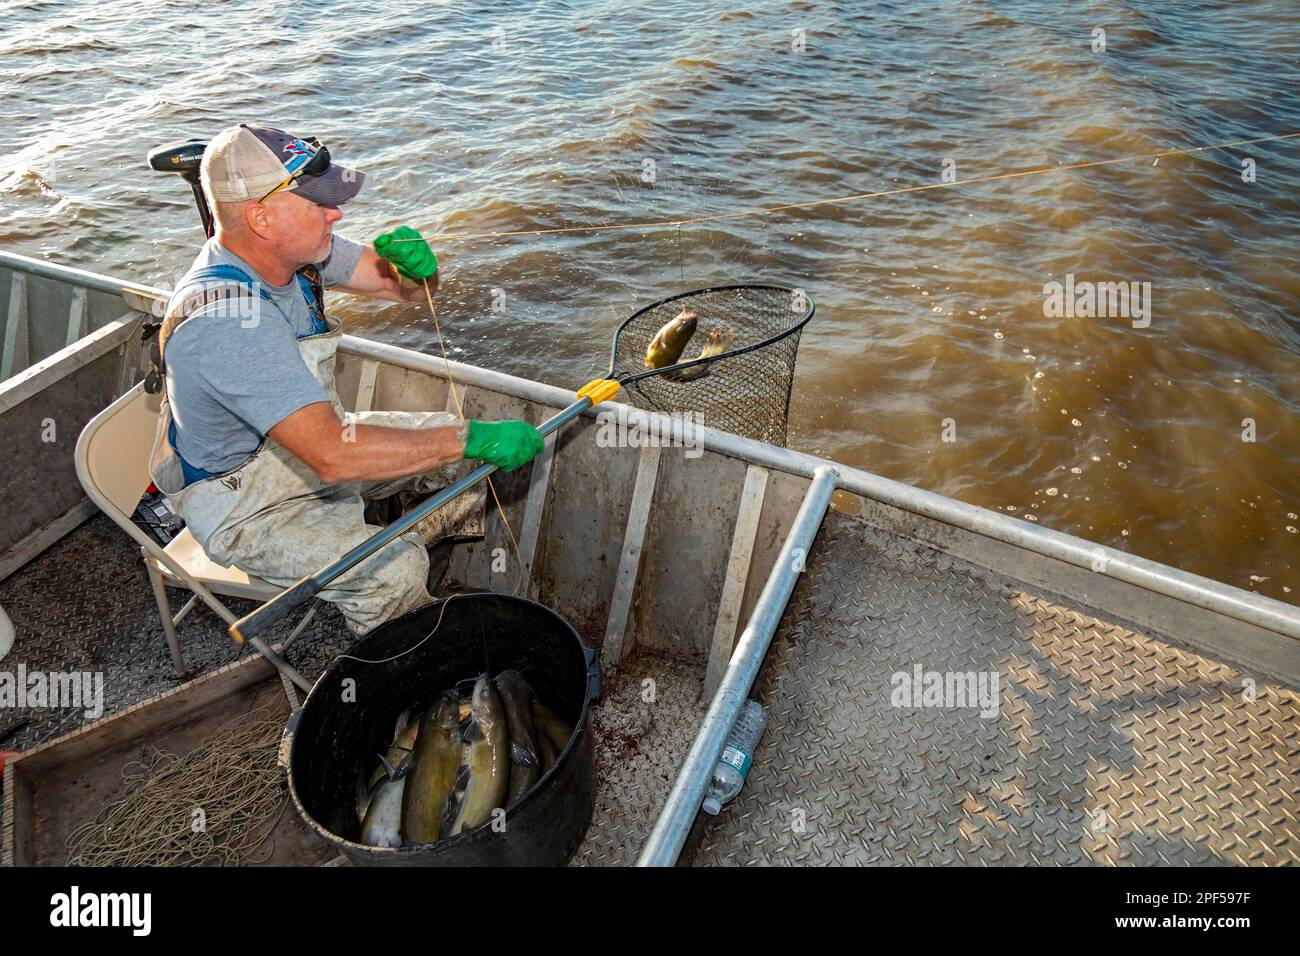 https://c8.alamy.com/comp/2PF597F/peoria-illinois-dave-buchanan-fishes-for-catfish-on-the-illinois-river-he-uses-a-trotline-a-long-line-from-which-a-hundred-or-more-baited-hooks-2PF597F.jpg